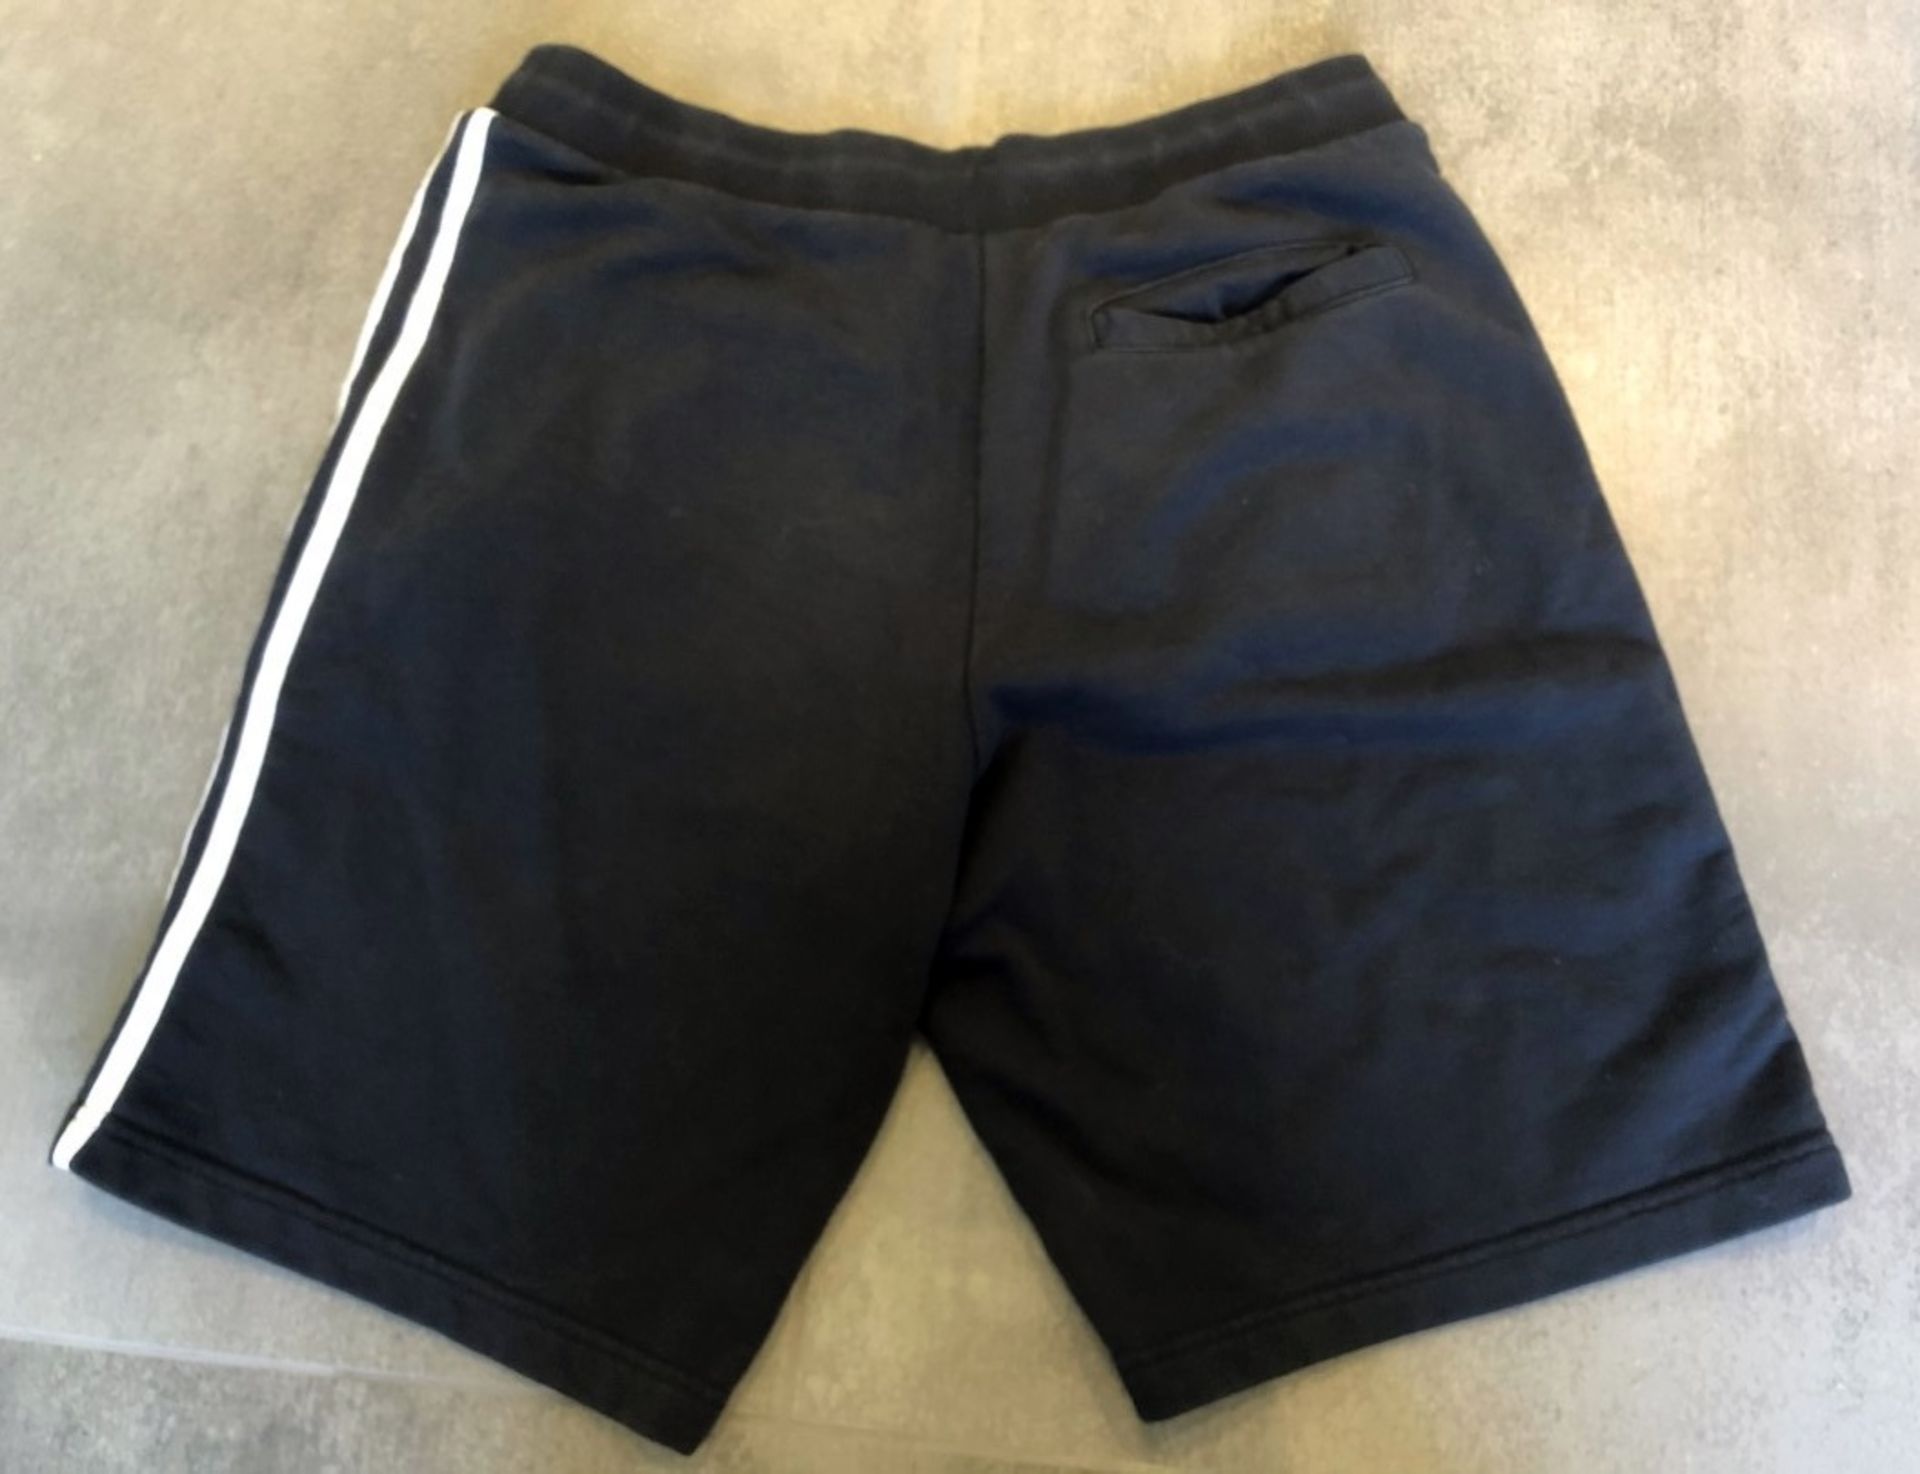 4 x Assorted Pairs Of Men's Genuine Adidas Shorts - AllIn Black - Sizes: L-XL - Preowned - Image 10 of 23